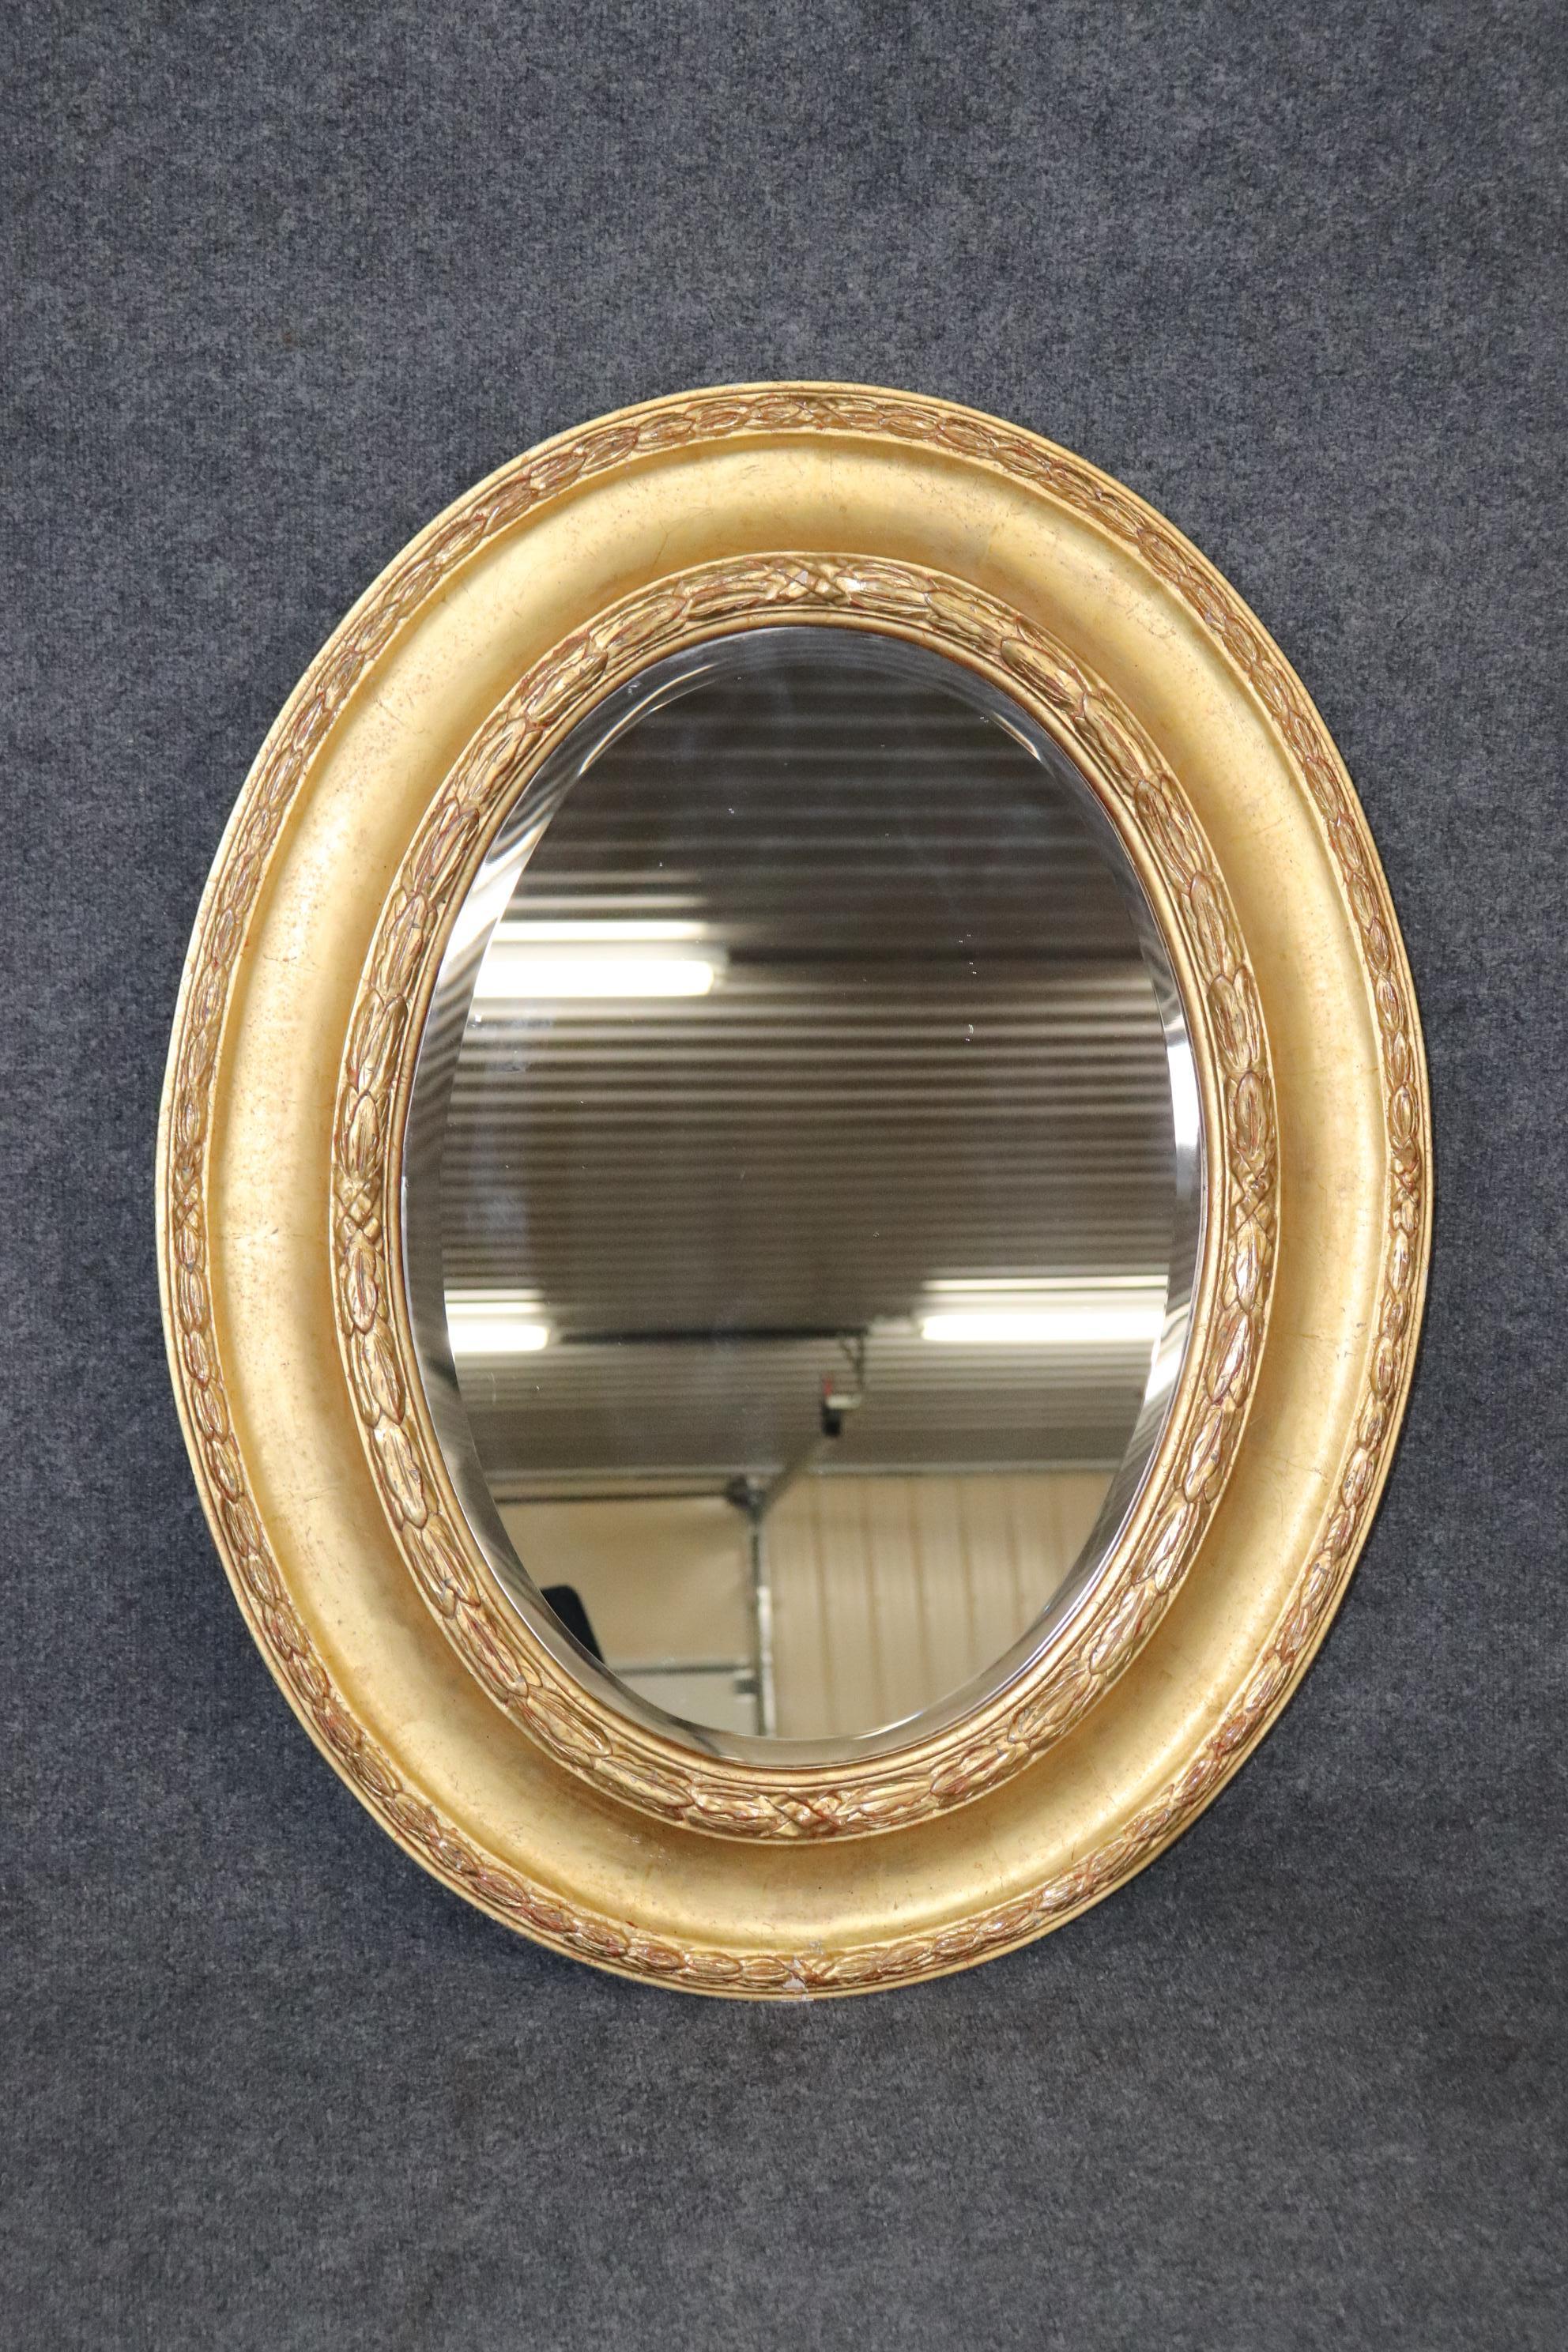 This is a gorgeous mirror because of the finish. Look at the genuine gold leaf finish thats super bright and has hints of Italian red bole clay ground behind the gold leaf. The mirror plate is clean and clear. Can be hung both vertically and